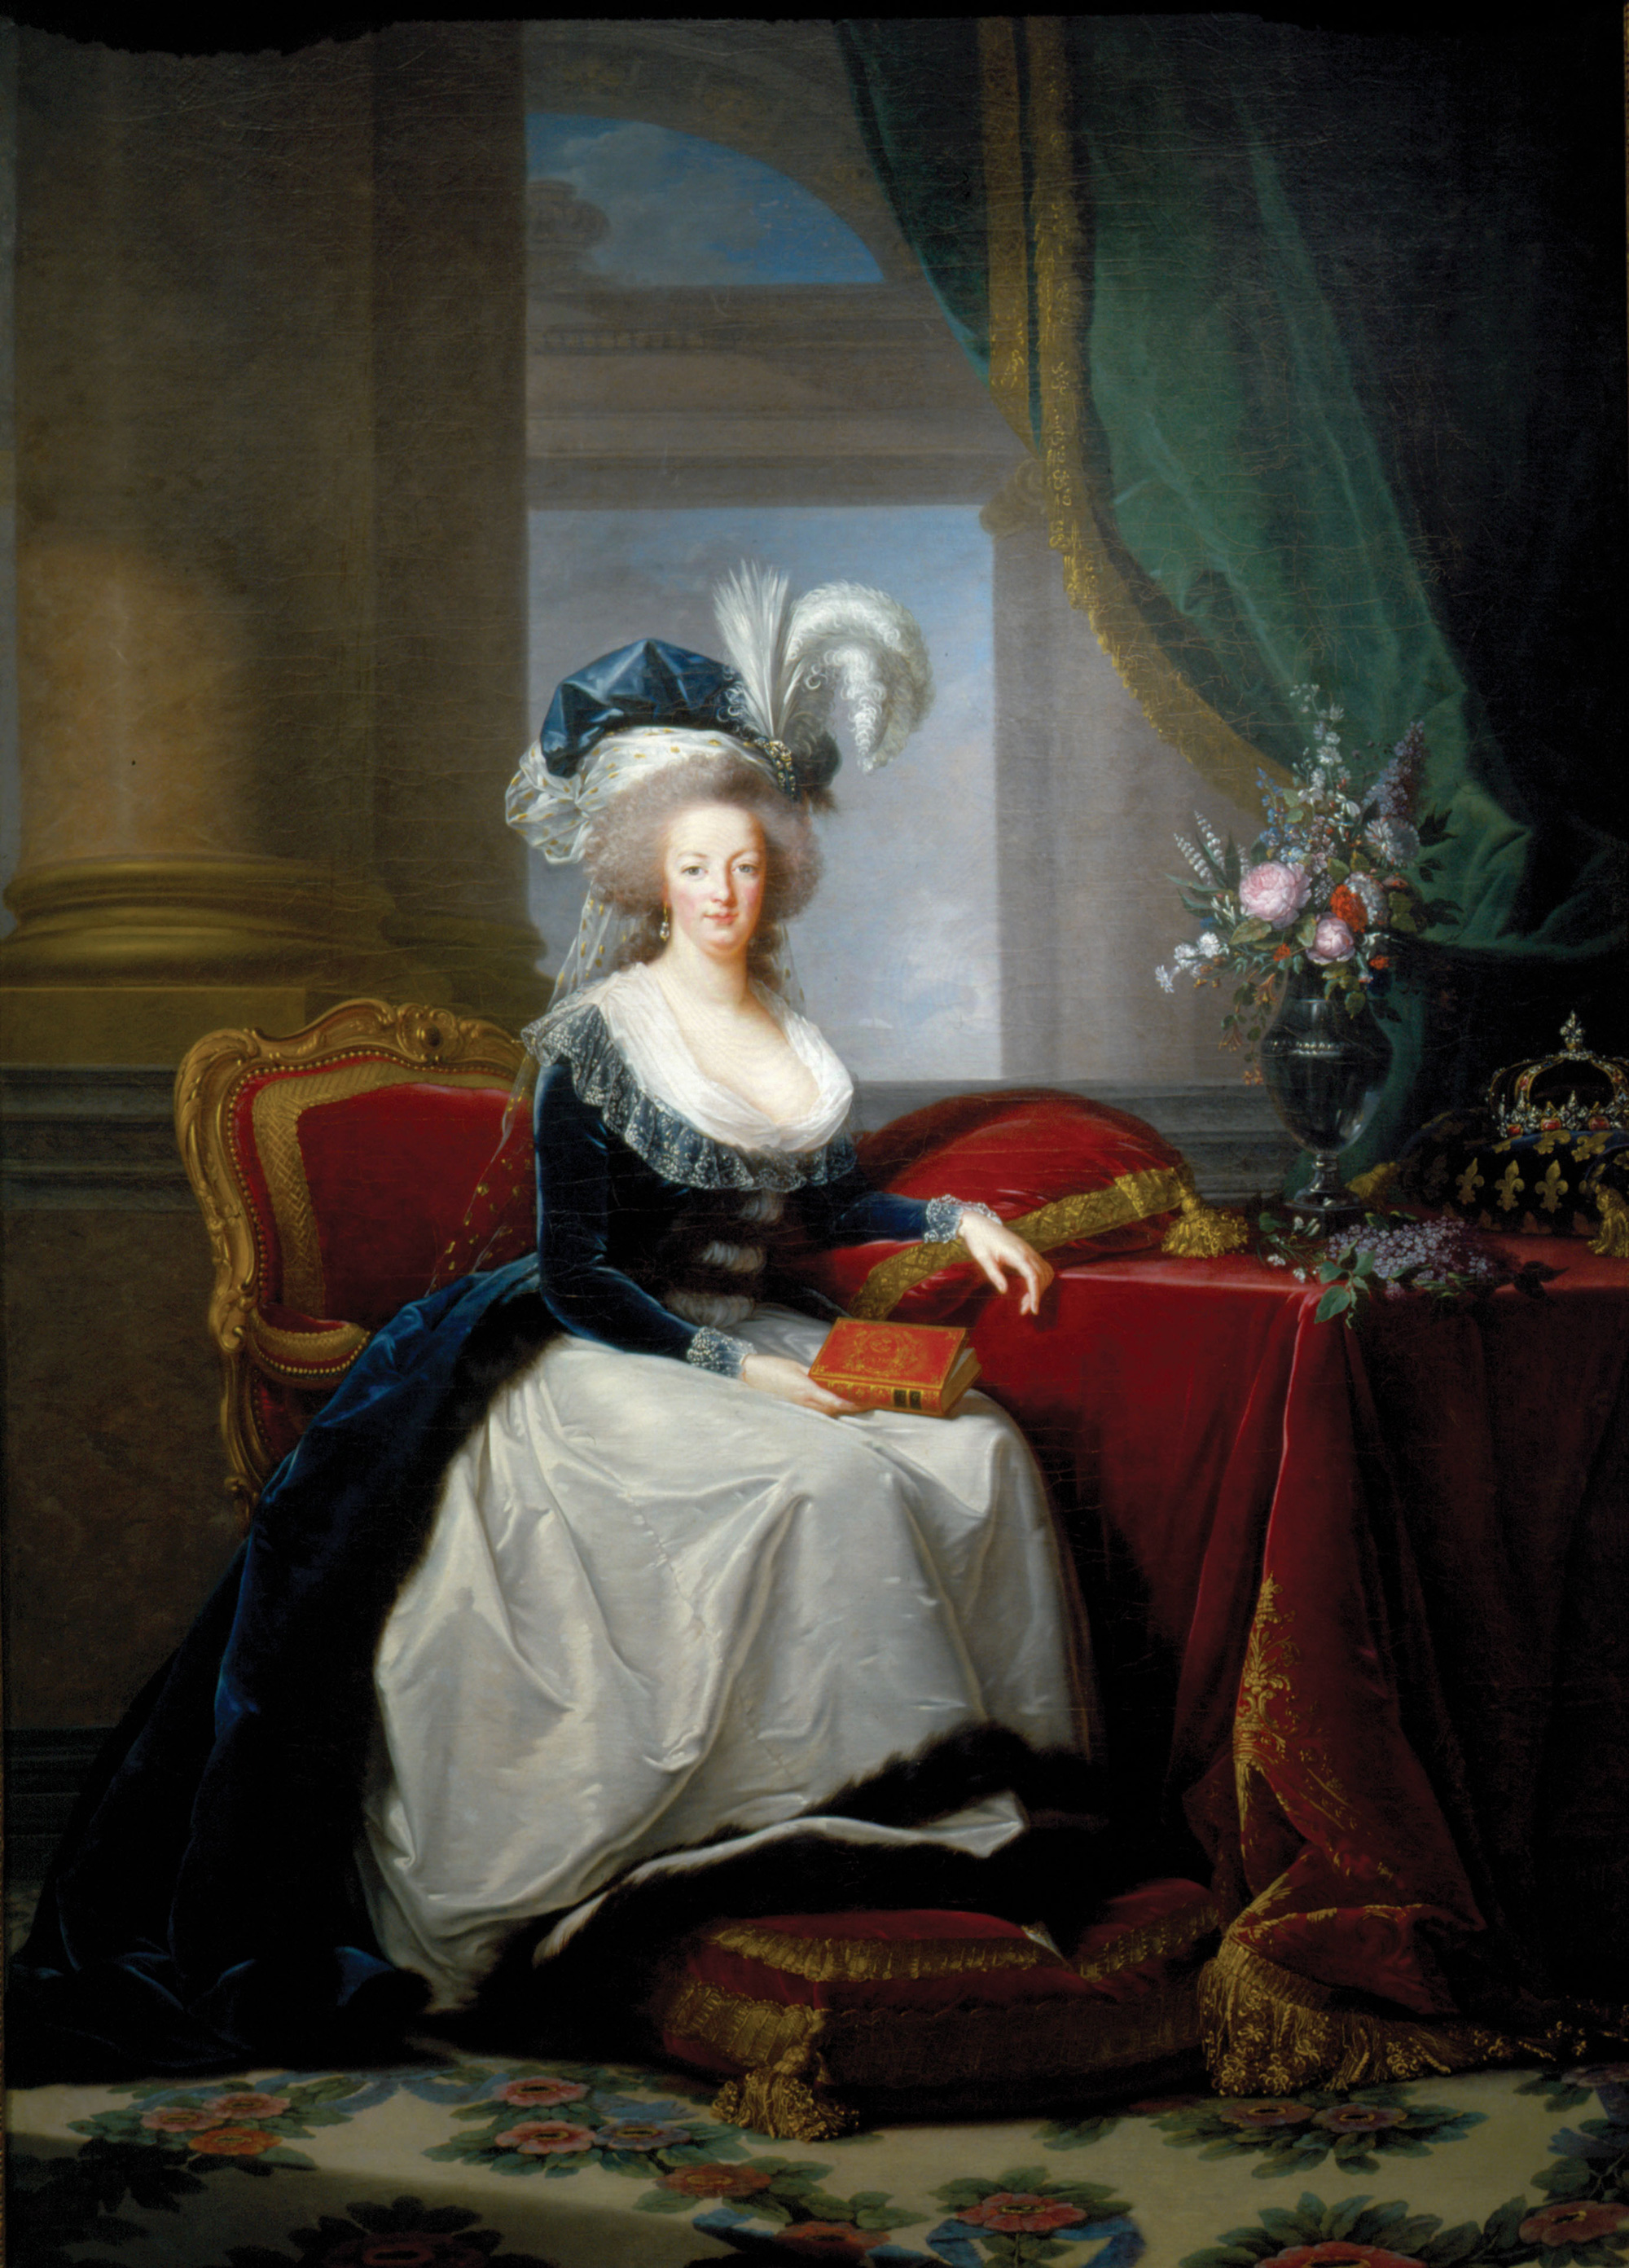 Portrait of Marie Antoinette, Queen of France by Élisabeth Vigee Le Brun - ca. 1788 - 109 1/2 x 75 1/2 in. New Orleans Museum of Art